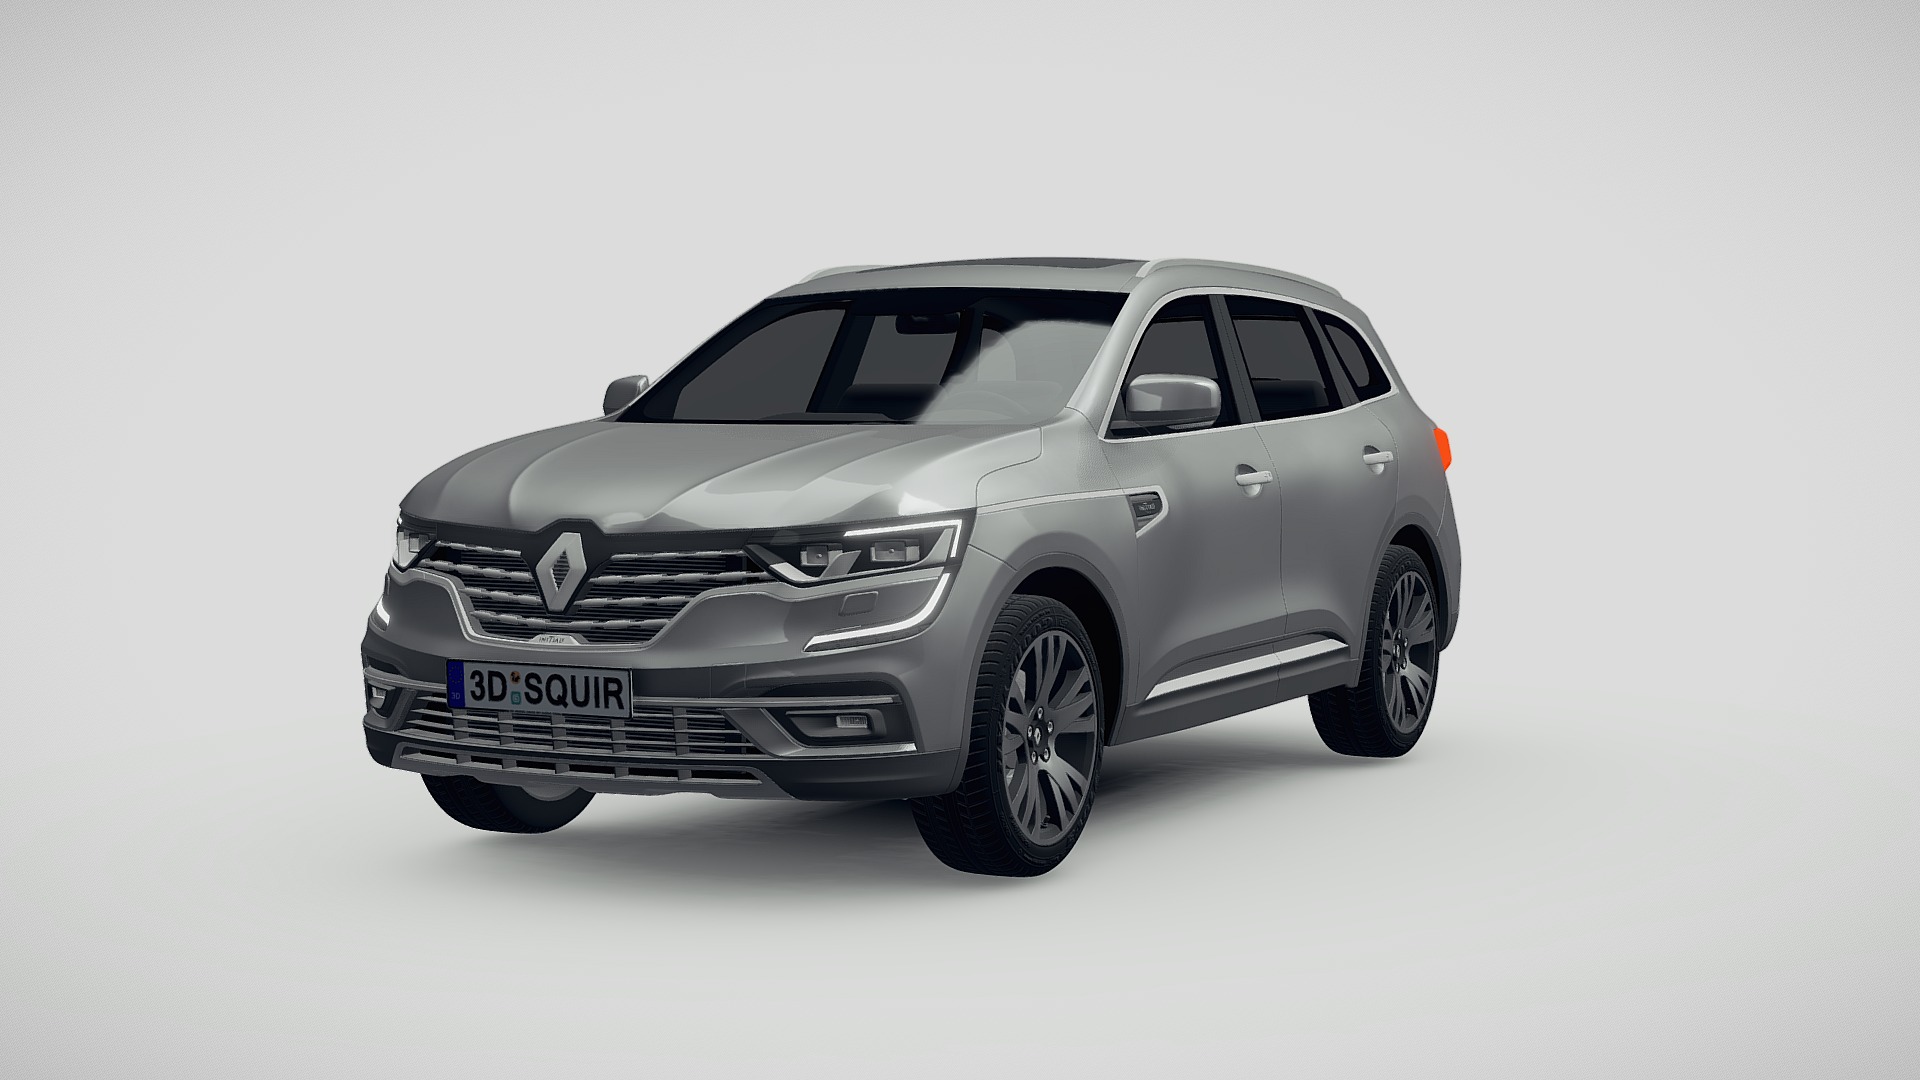 3D model Renault Koleos 2020 - This is a 3D model of the Renault Koleos 2020. The 3D model is about a silver car with a white background.